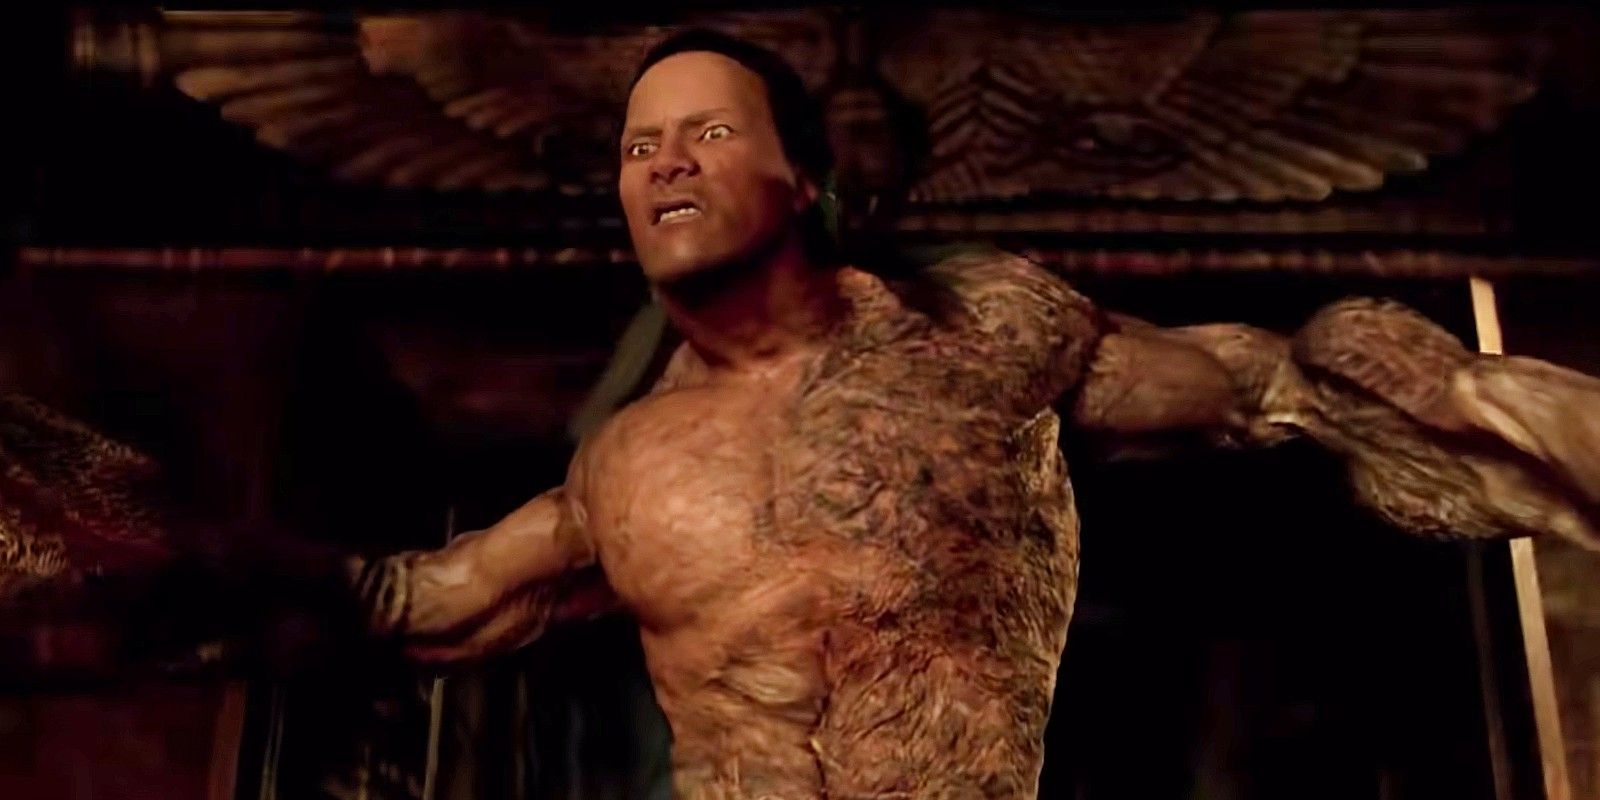 The Scorpion King uncaged in The Mummy Returns